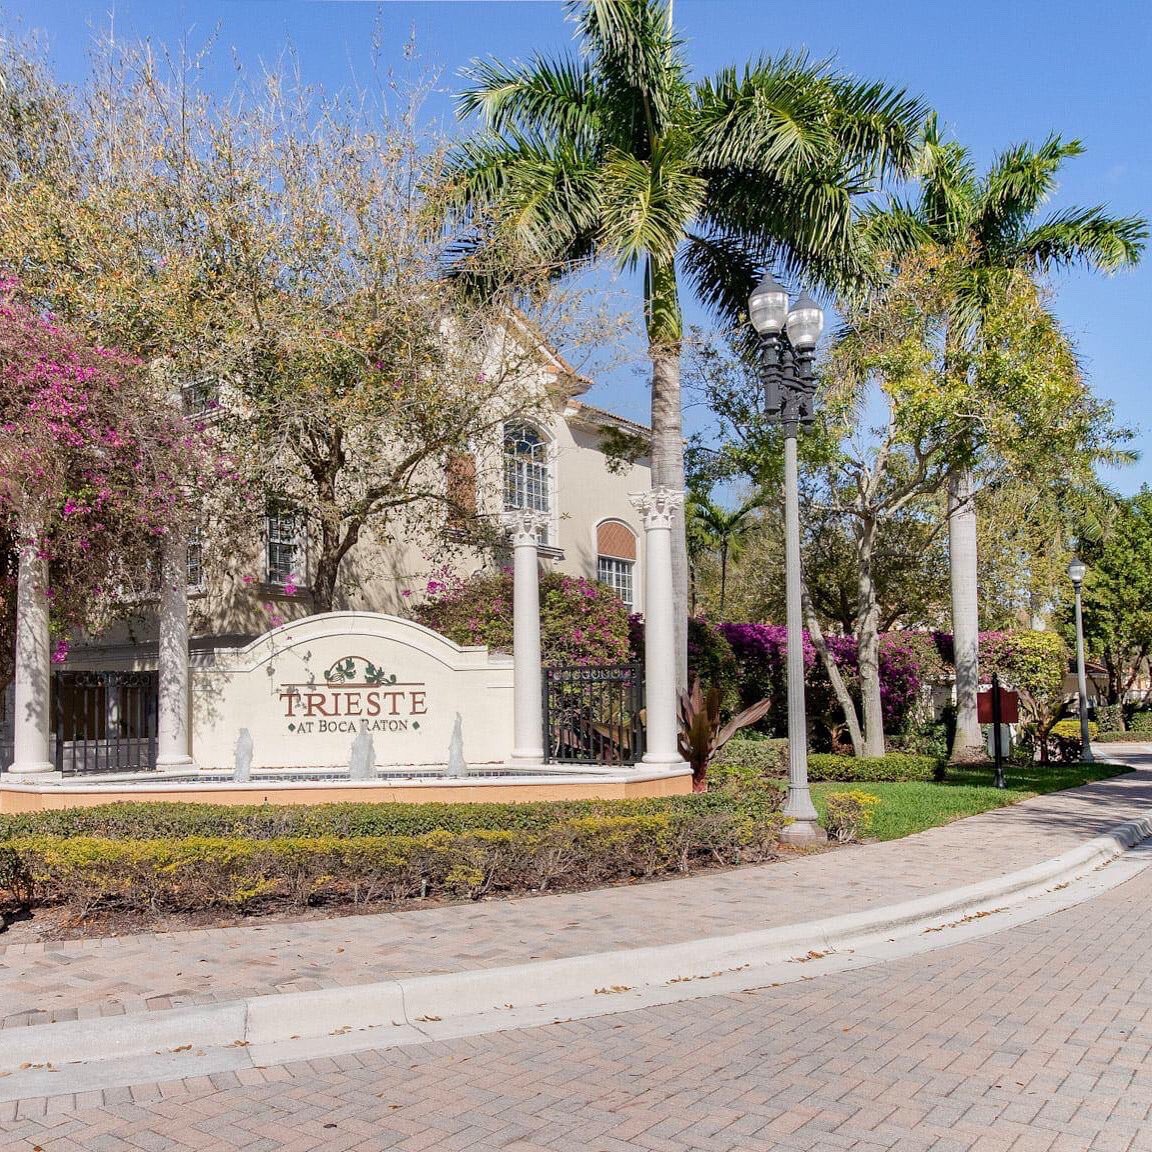 Coming Soon, Trieste East Boca! Asking $779,000 SHOWINGS BEGIN July 30, 2021 Three-story, corner townhome with private elevator, 3 bedrooms, 3.5 baths, impact windows and doors, and a 2-car garage. 24/7 security gated community, community pool. #bocarealestate